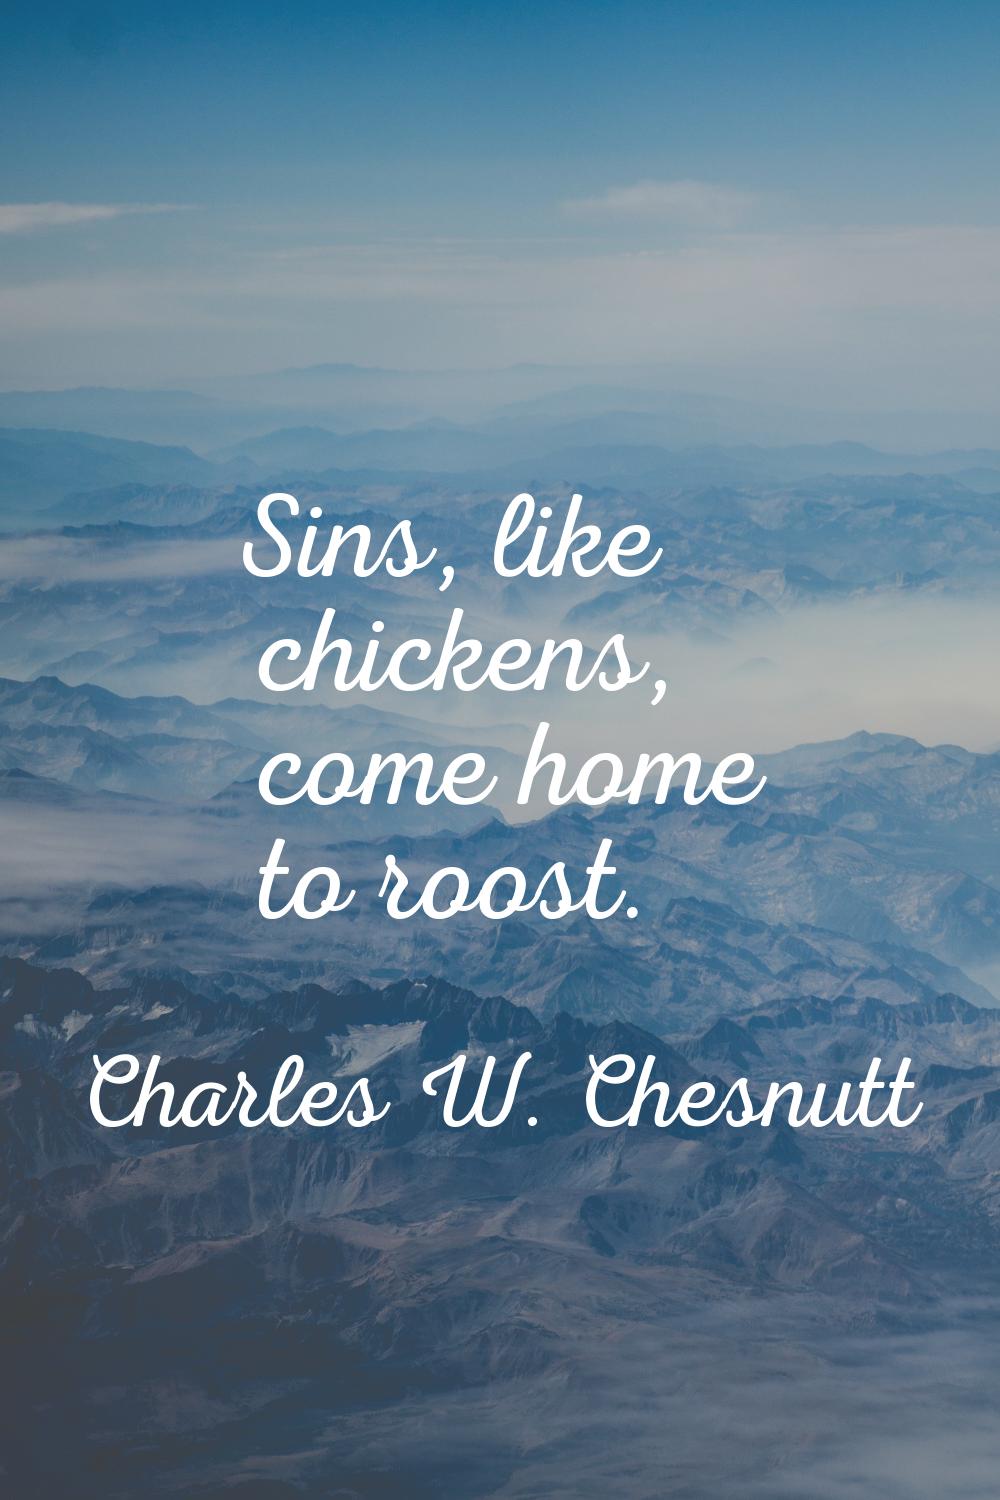 Sins, like chickens, come home to roost.